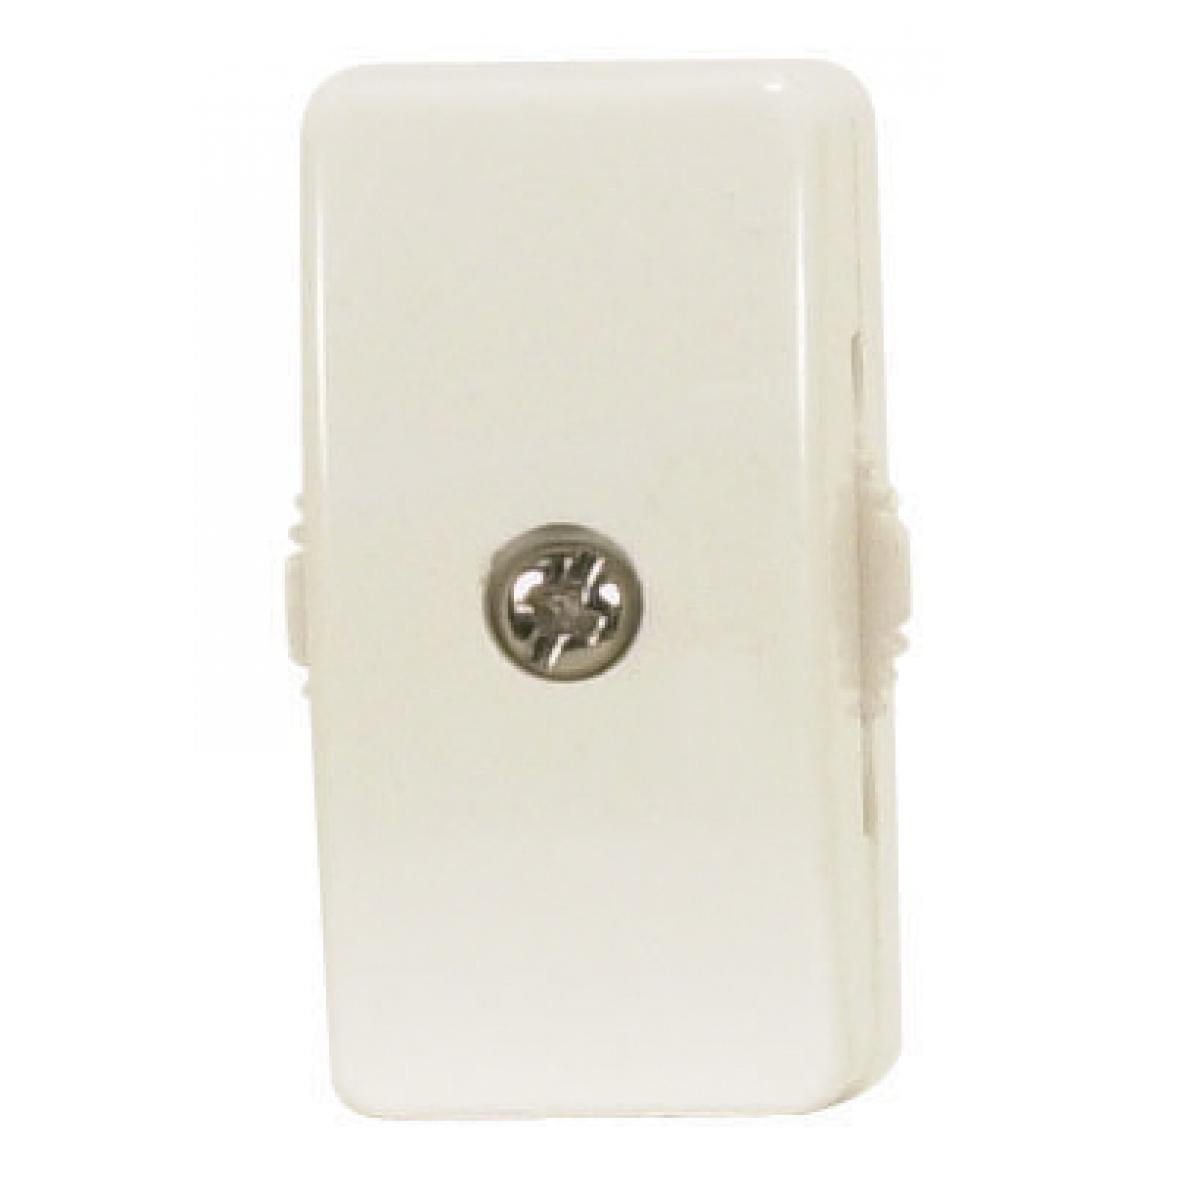 90-573 CORD SWITCH FOR 18/2 WIRE WHIT